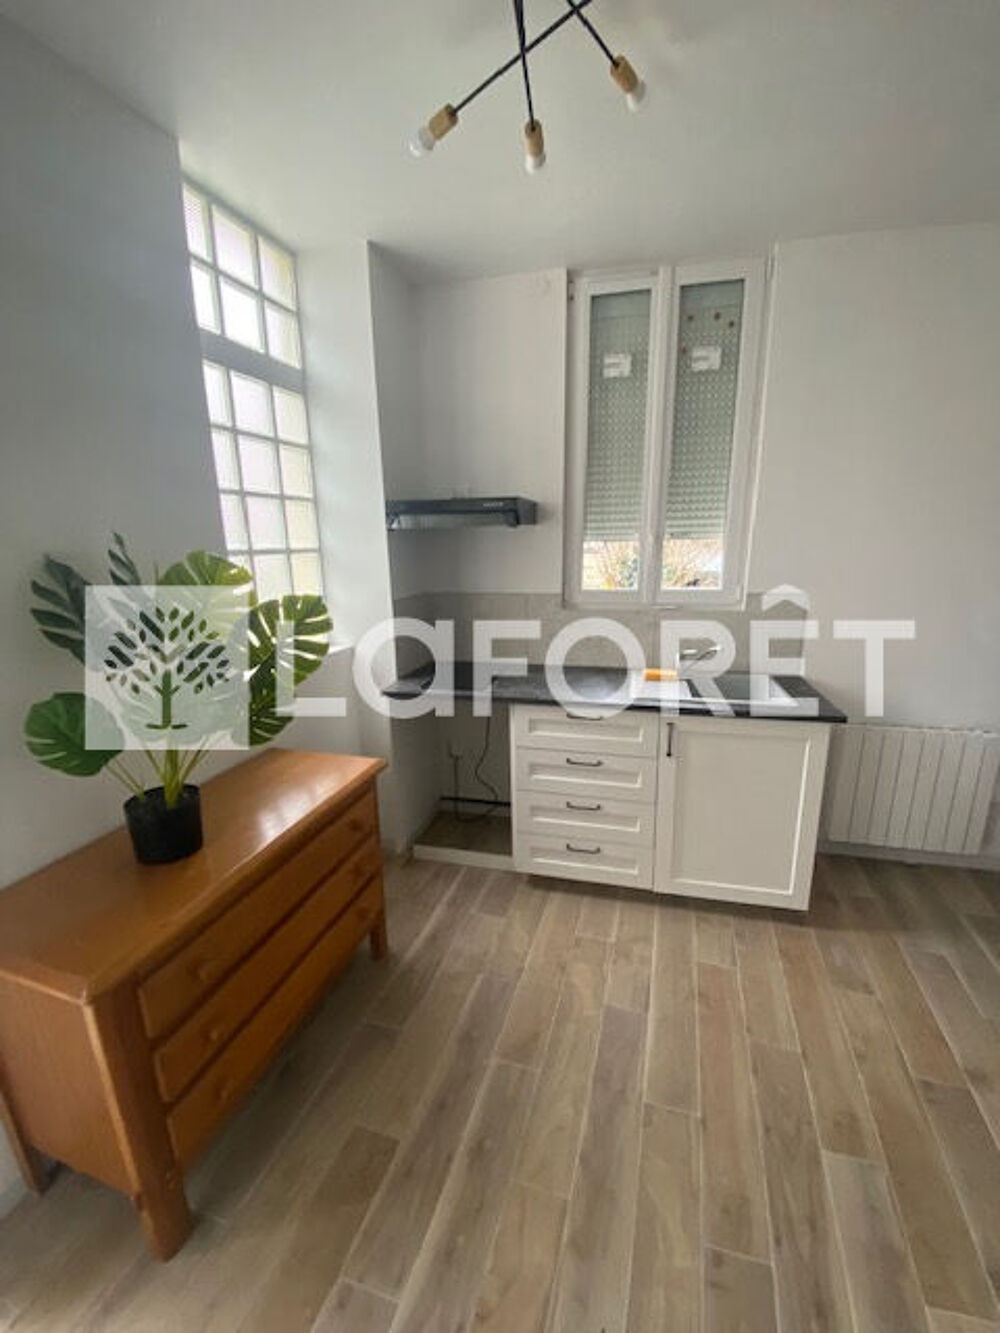 Location Appartement Appartement Gagny 1 pice(s) 21 m2 Gagny